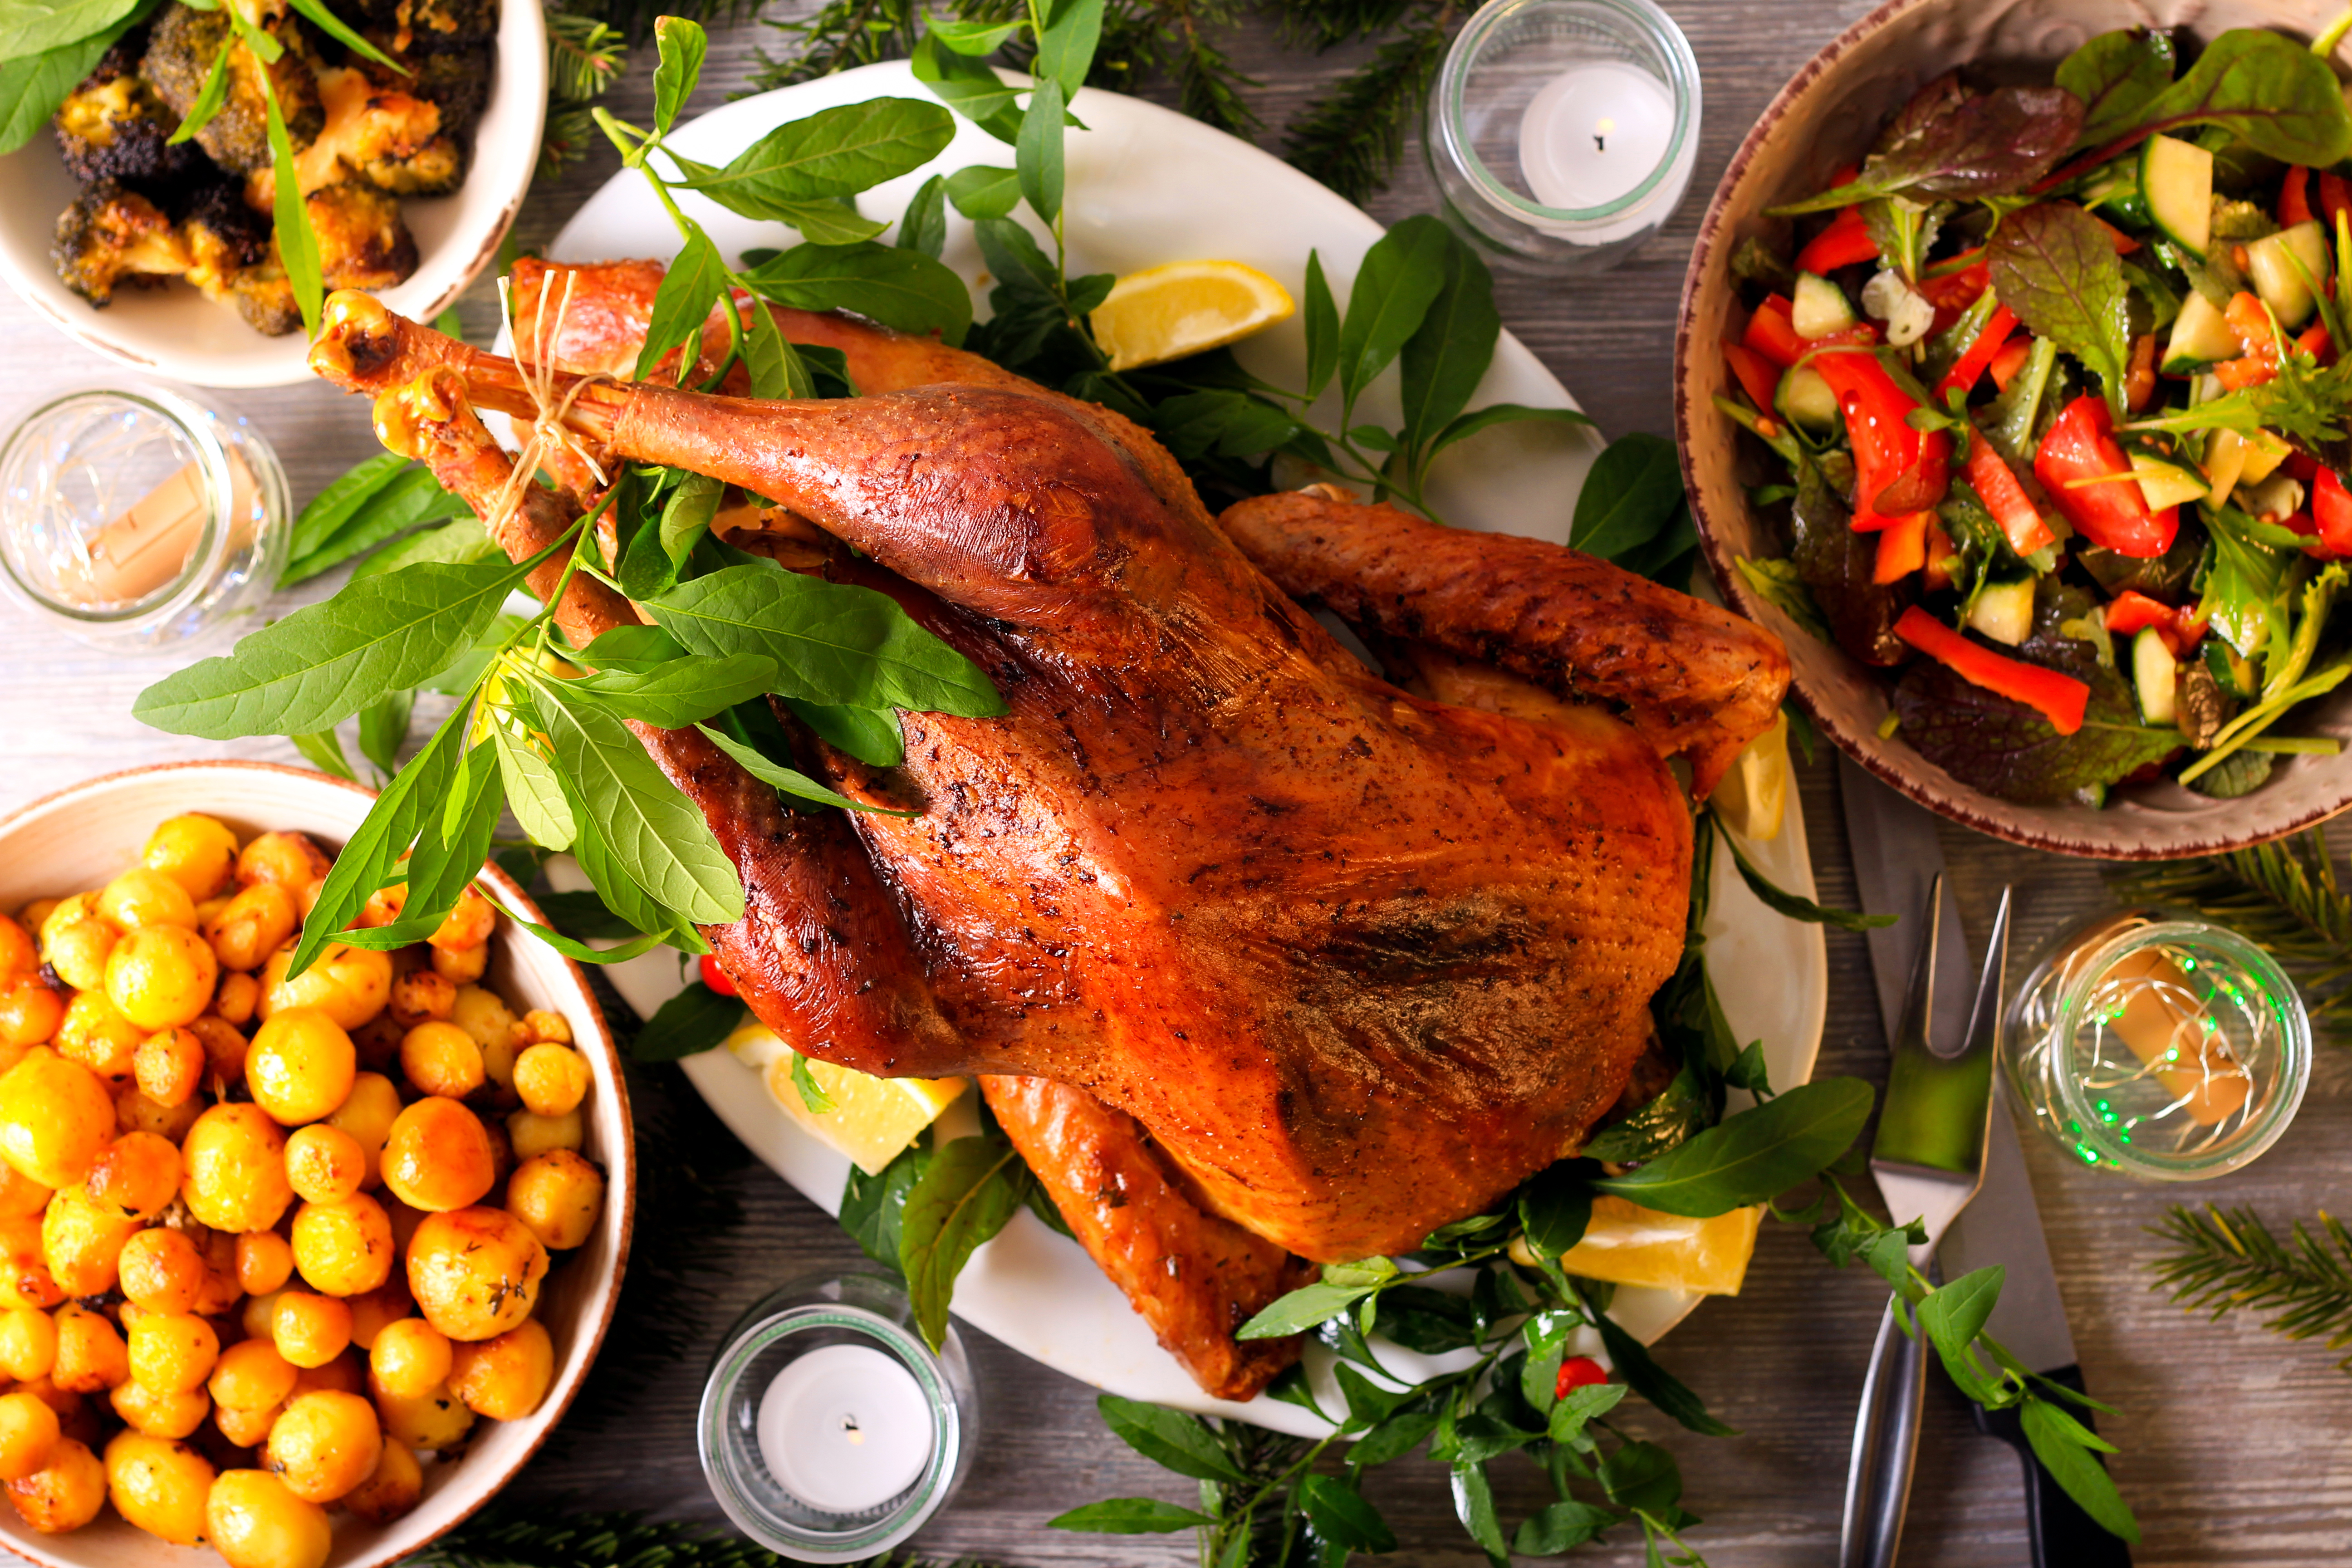 Festive dinner with roast wild turkey and other dishes served on table